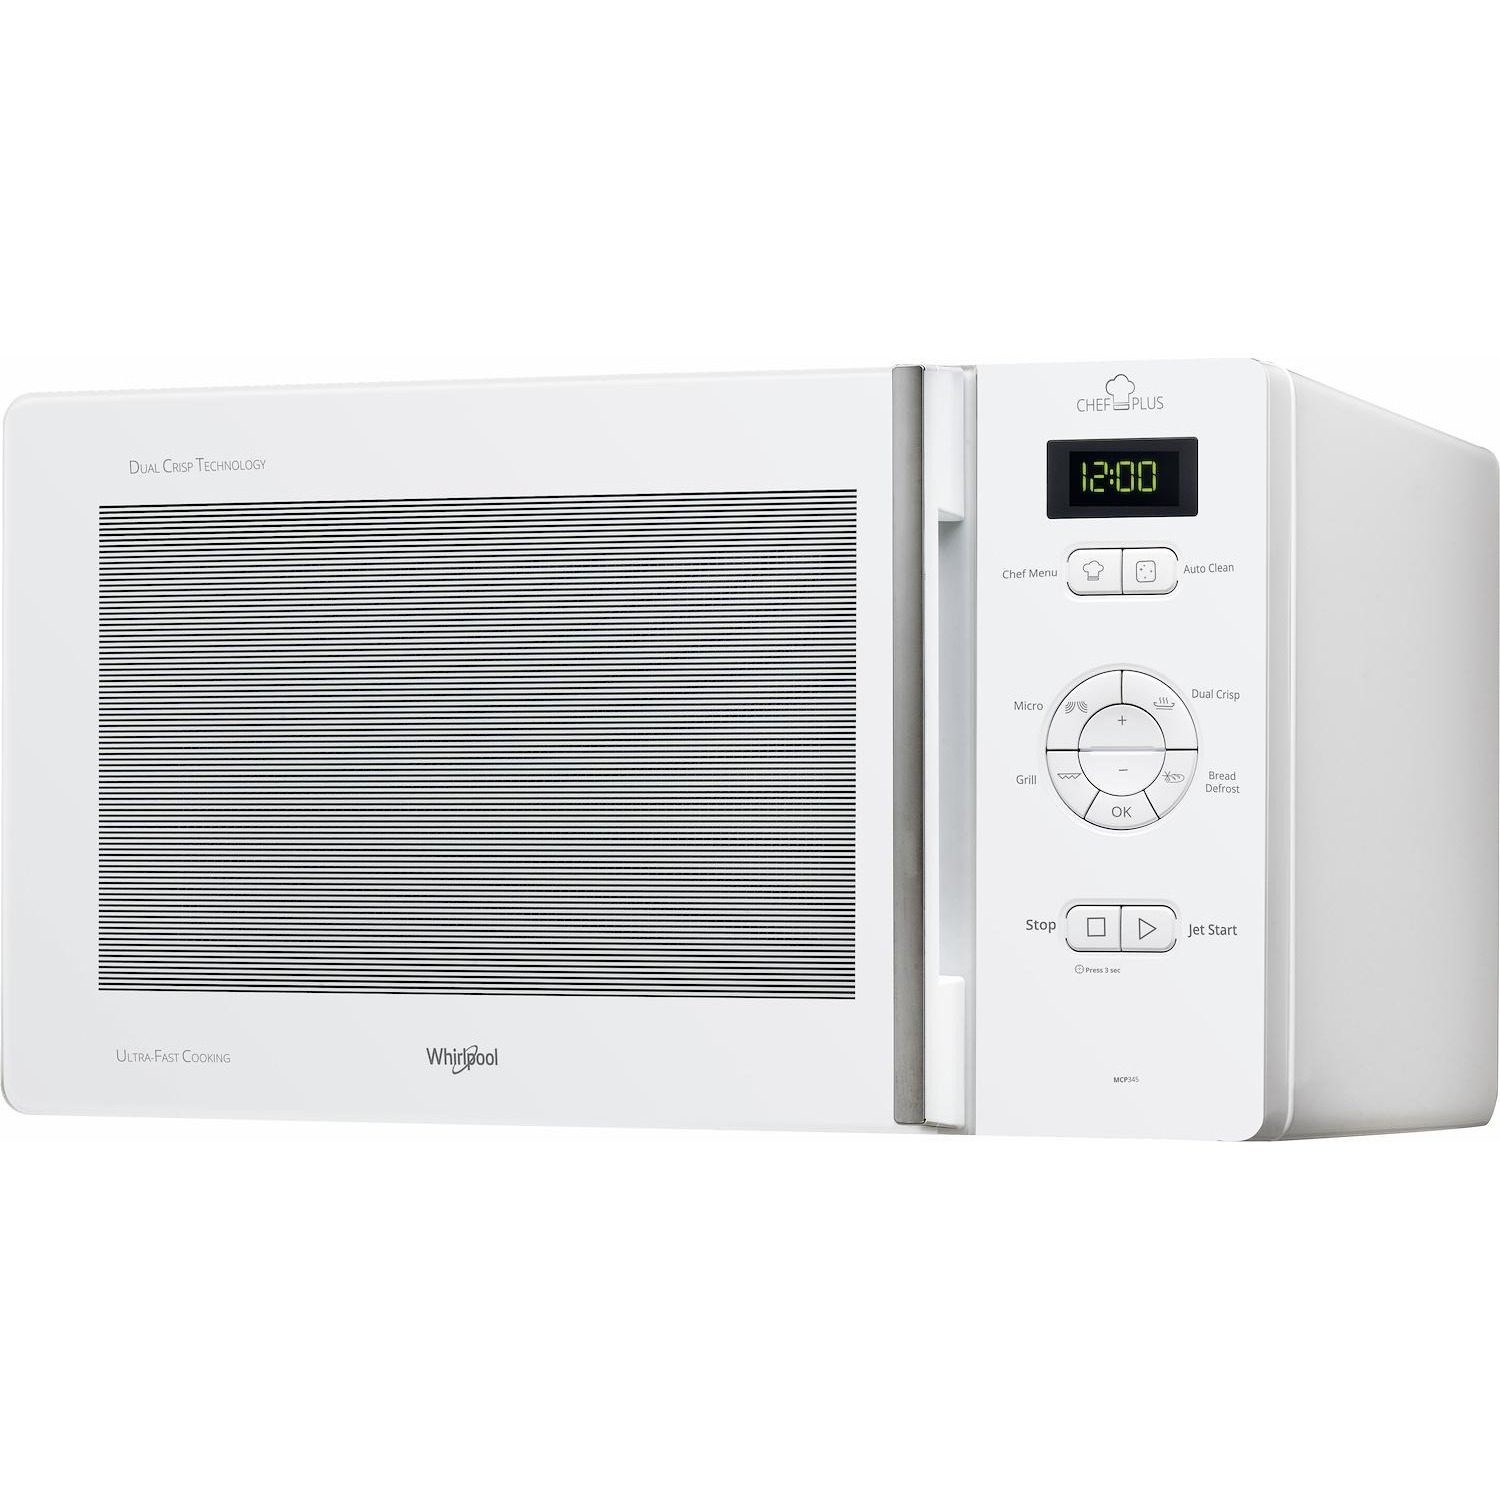 Image of Forno microonde Whirlpool MCP 345 WH bianco